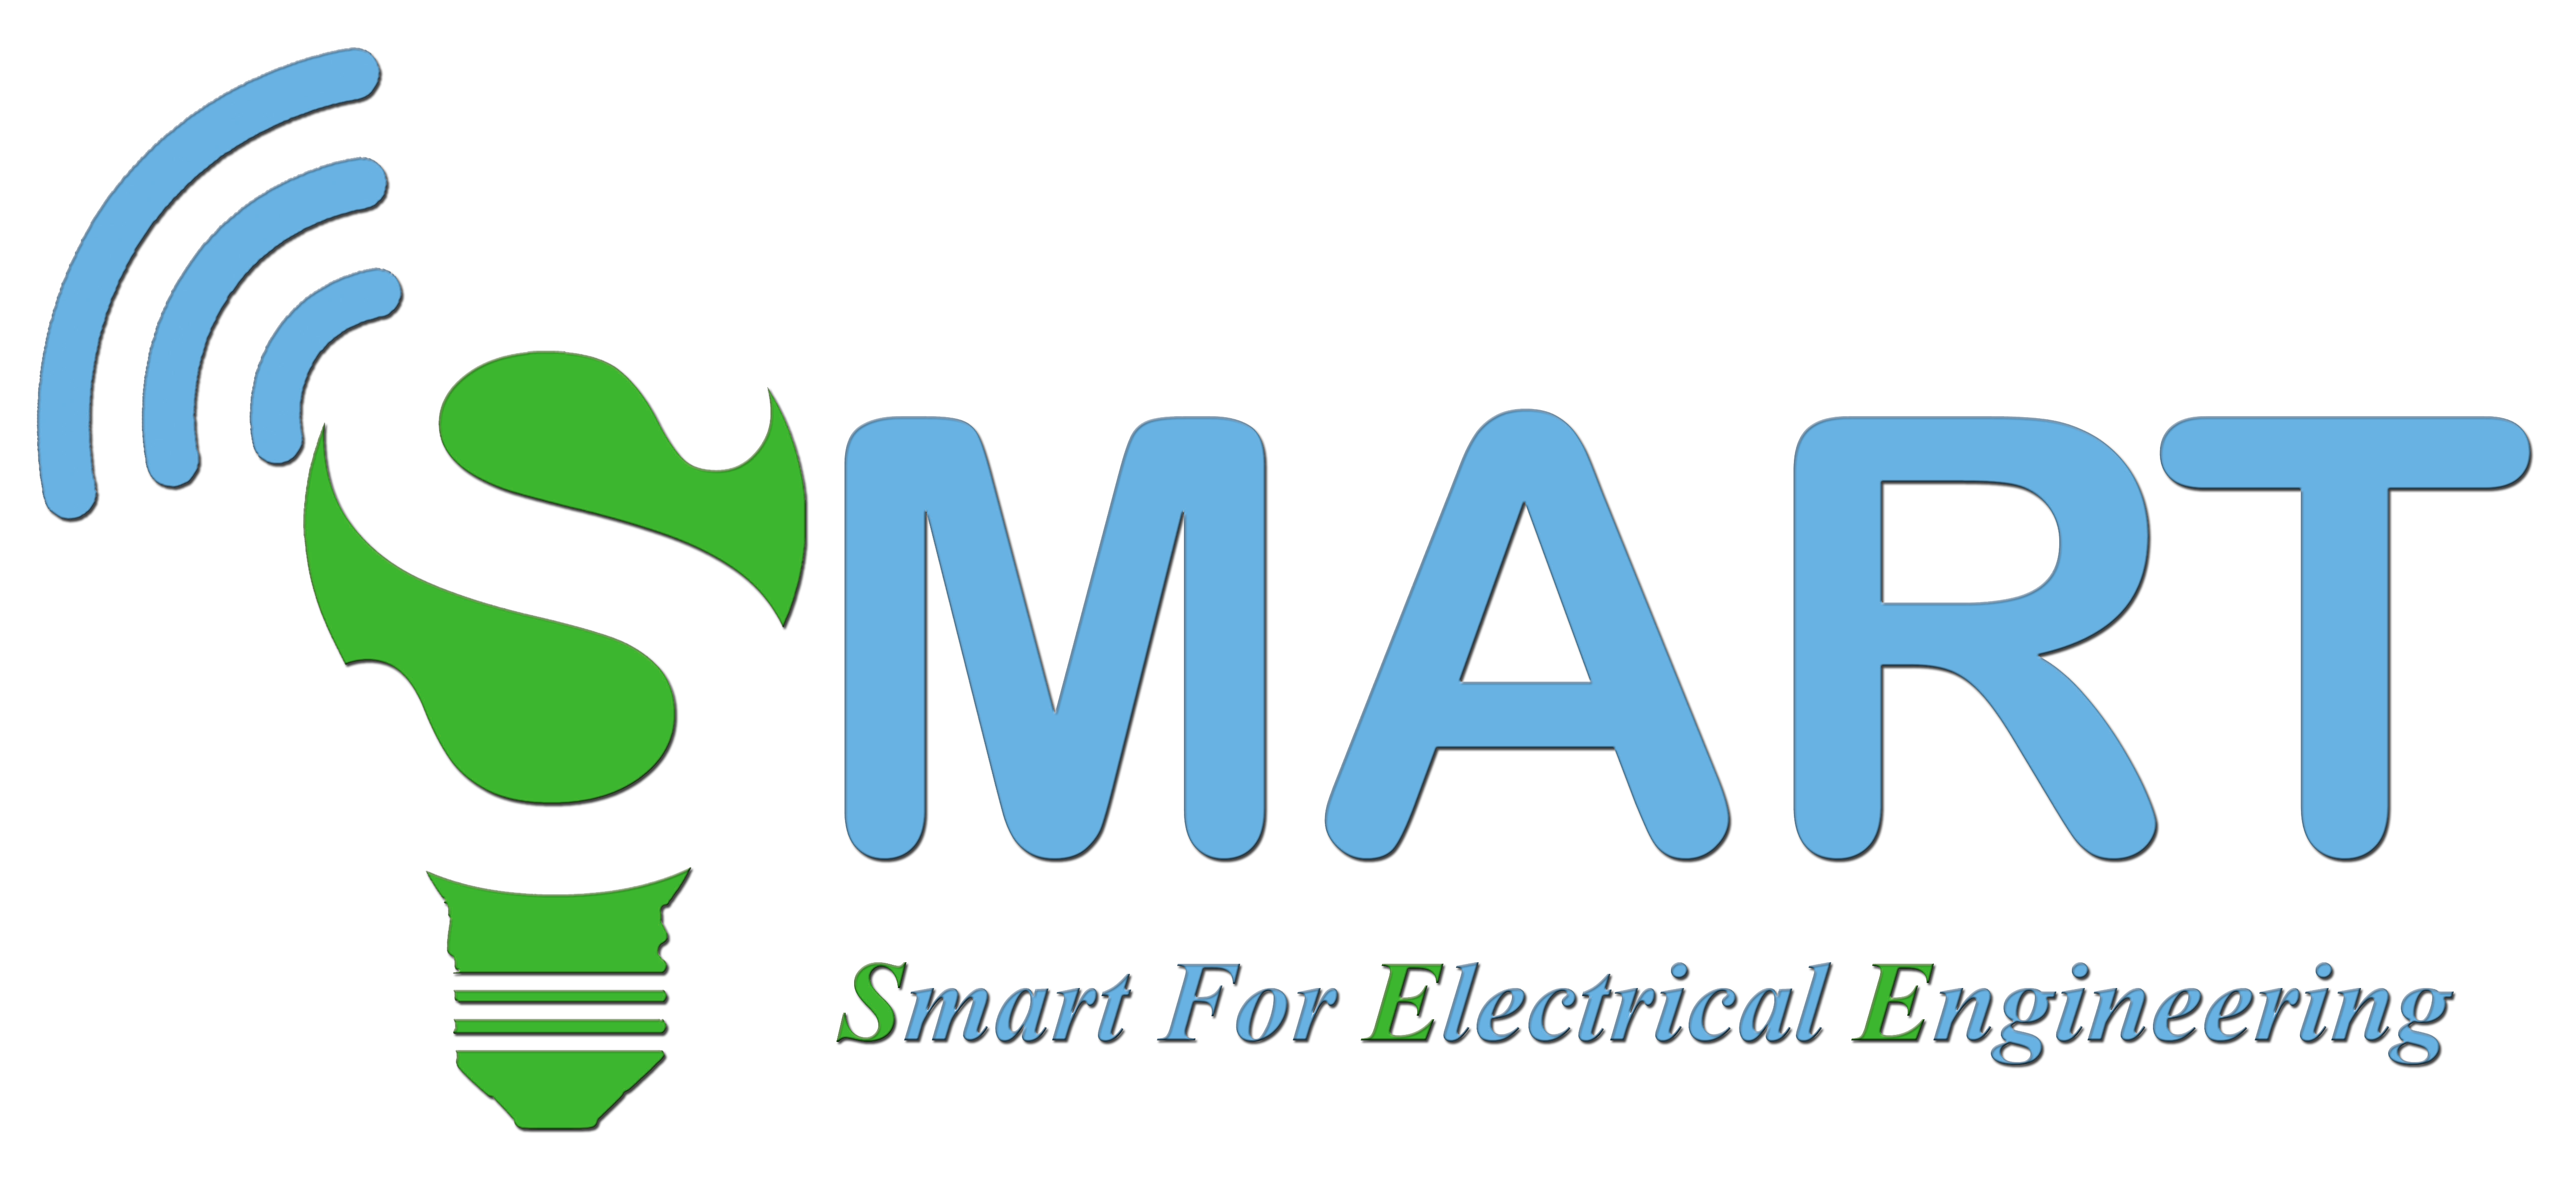 Smart for Electrical Engineering - logo